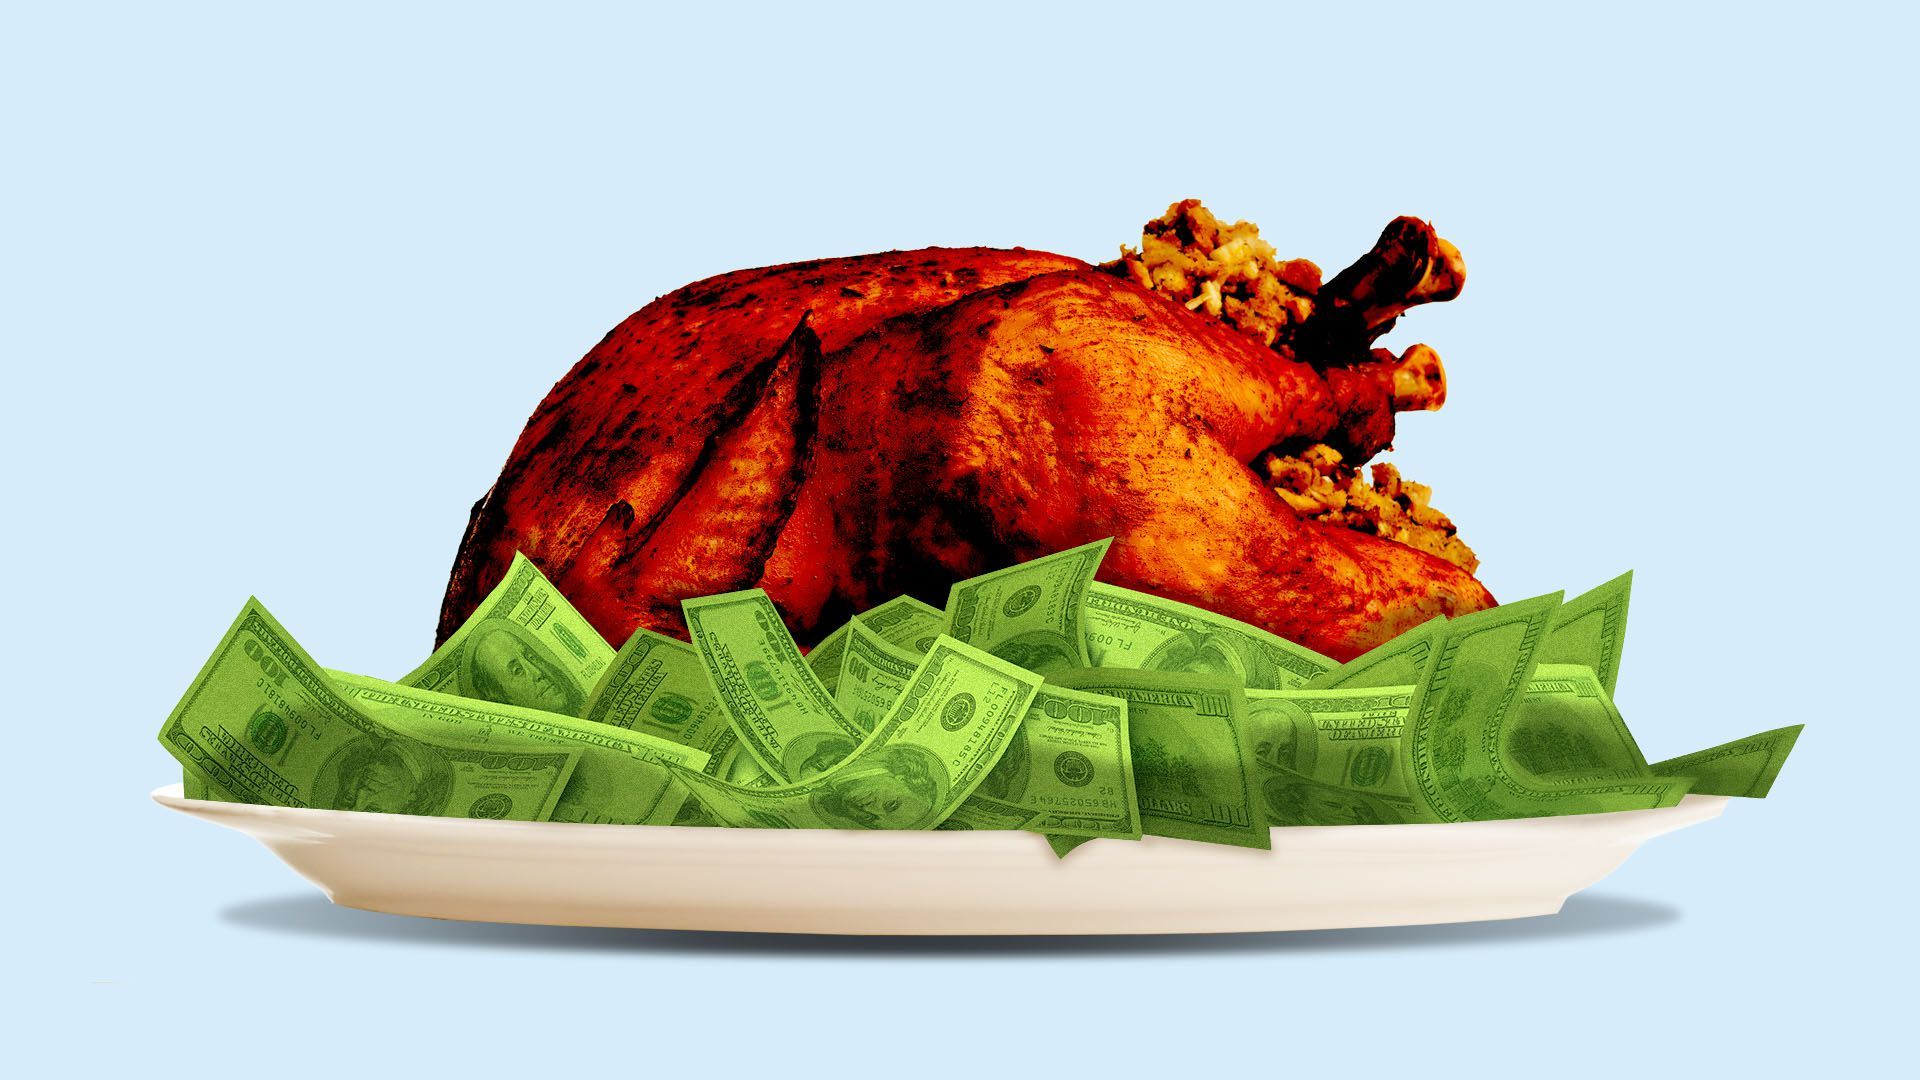 An illustration of a turkey in a bed of cash.